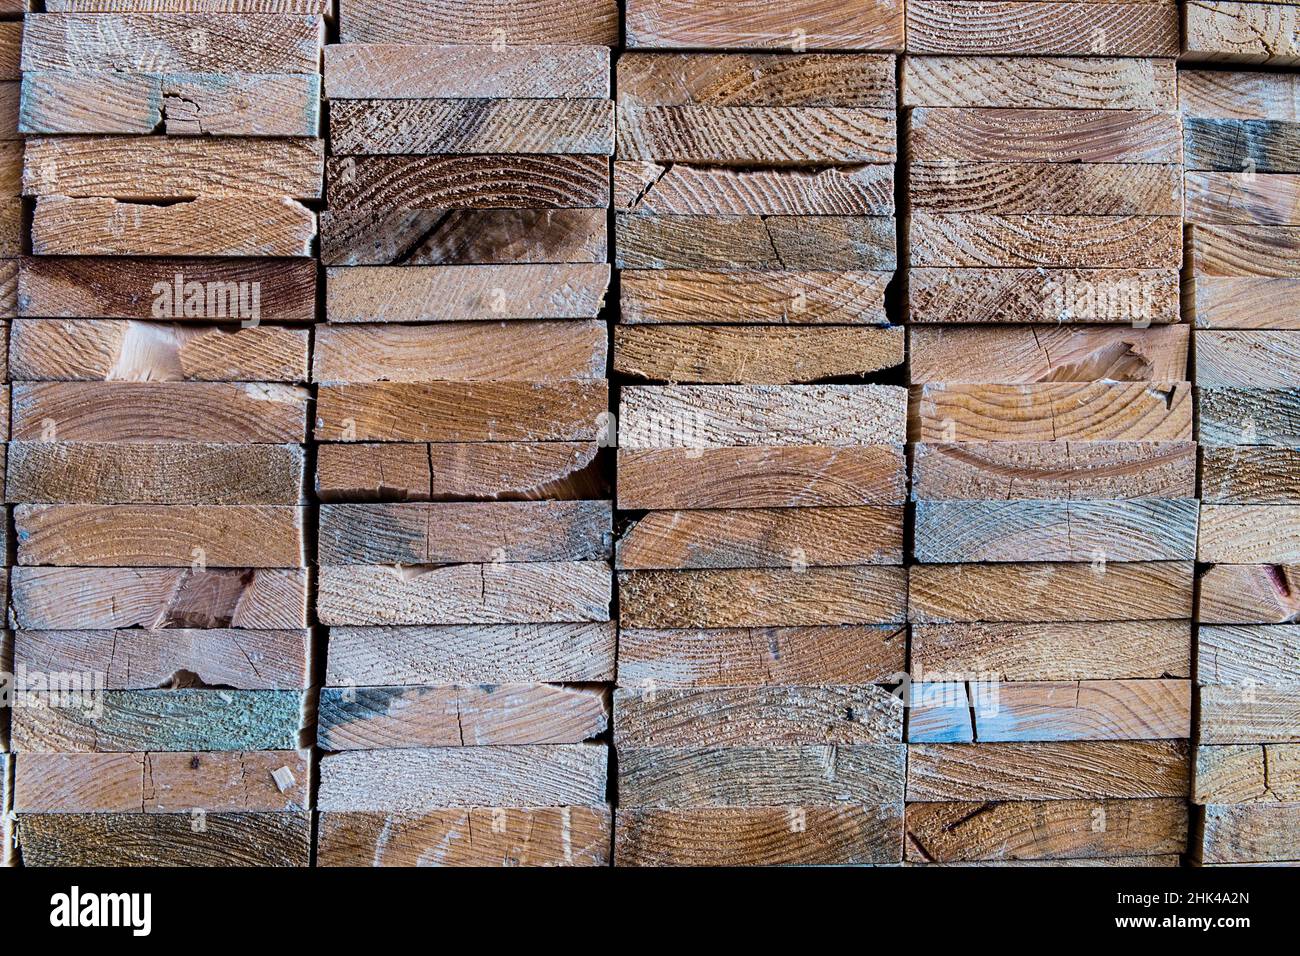 Close-up a group of industry wood processing material in warehouse for use on construction and make a furniture for decor Stock Photo